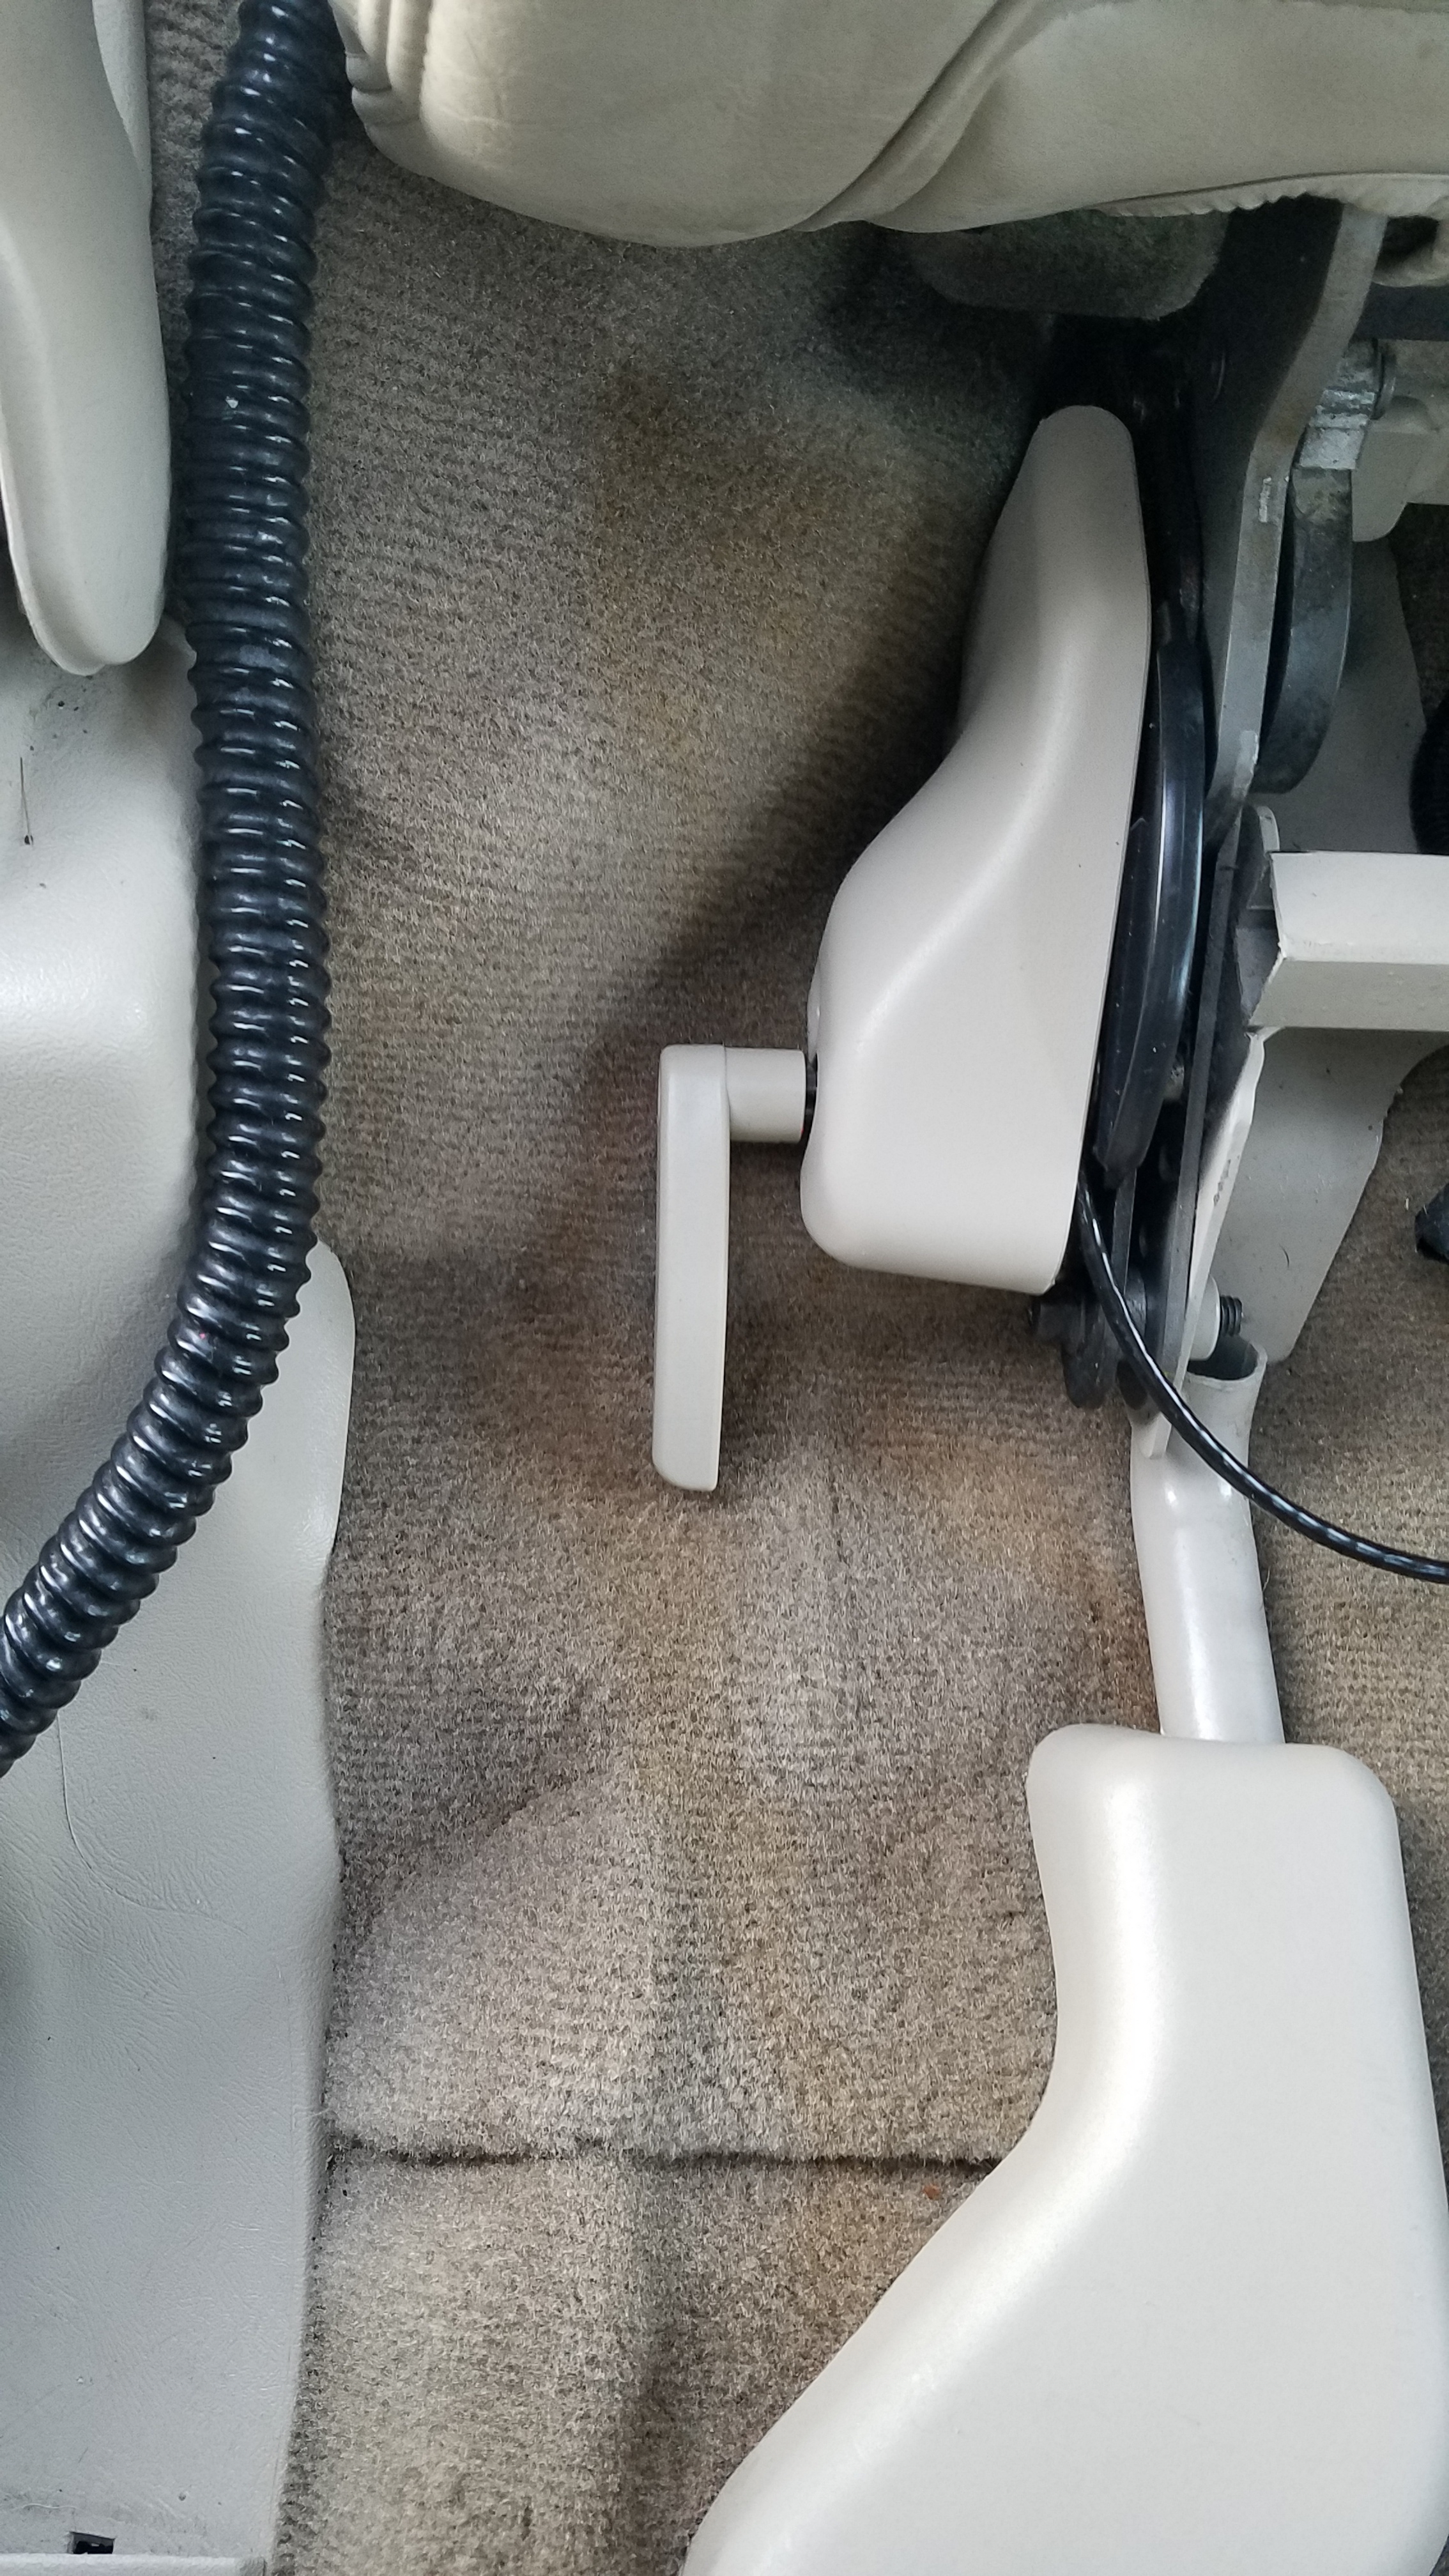 Carpet Stain After